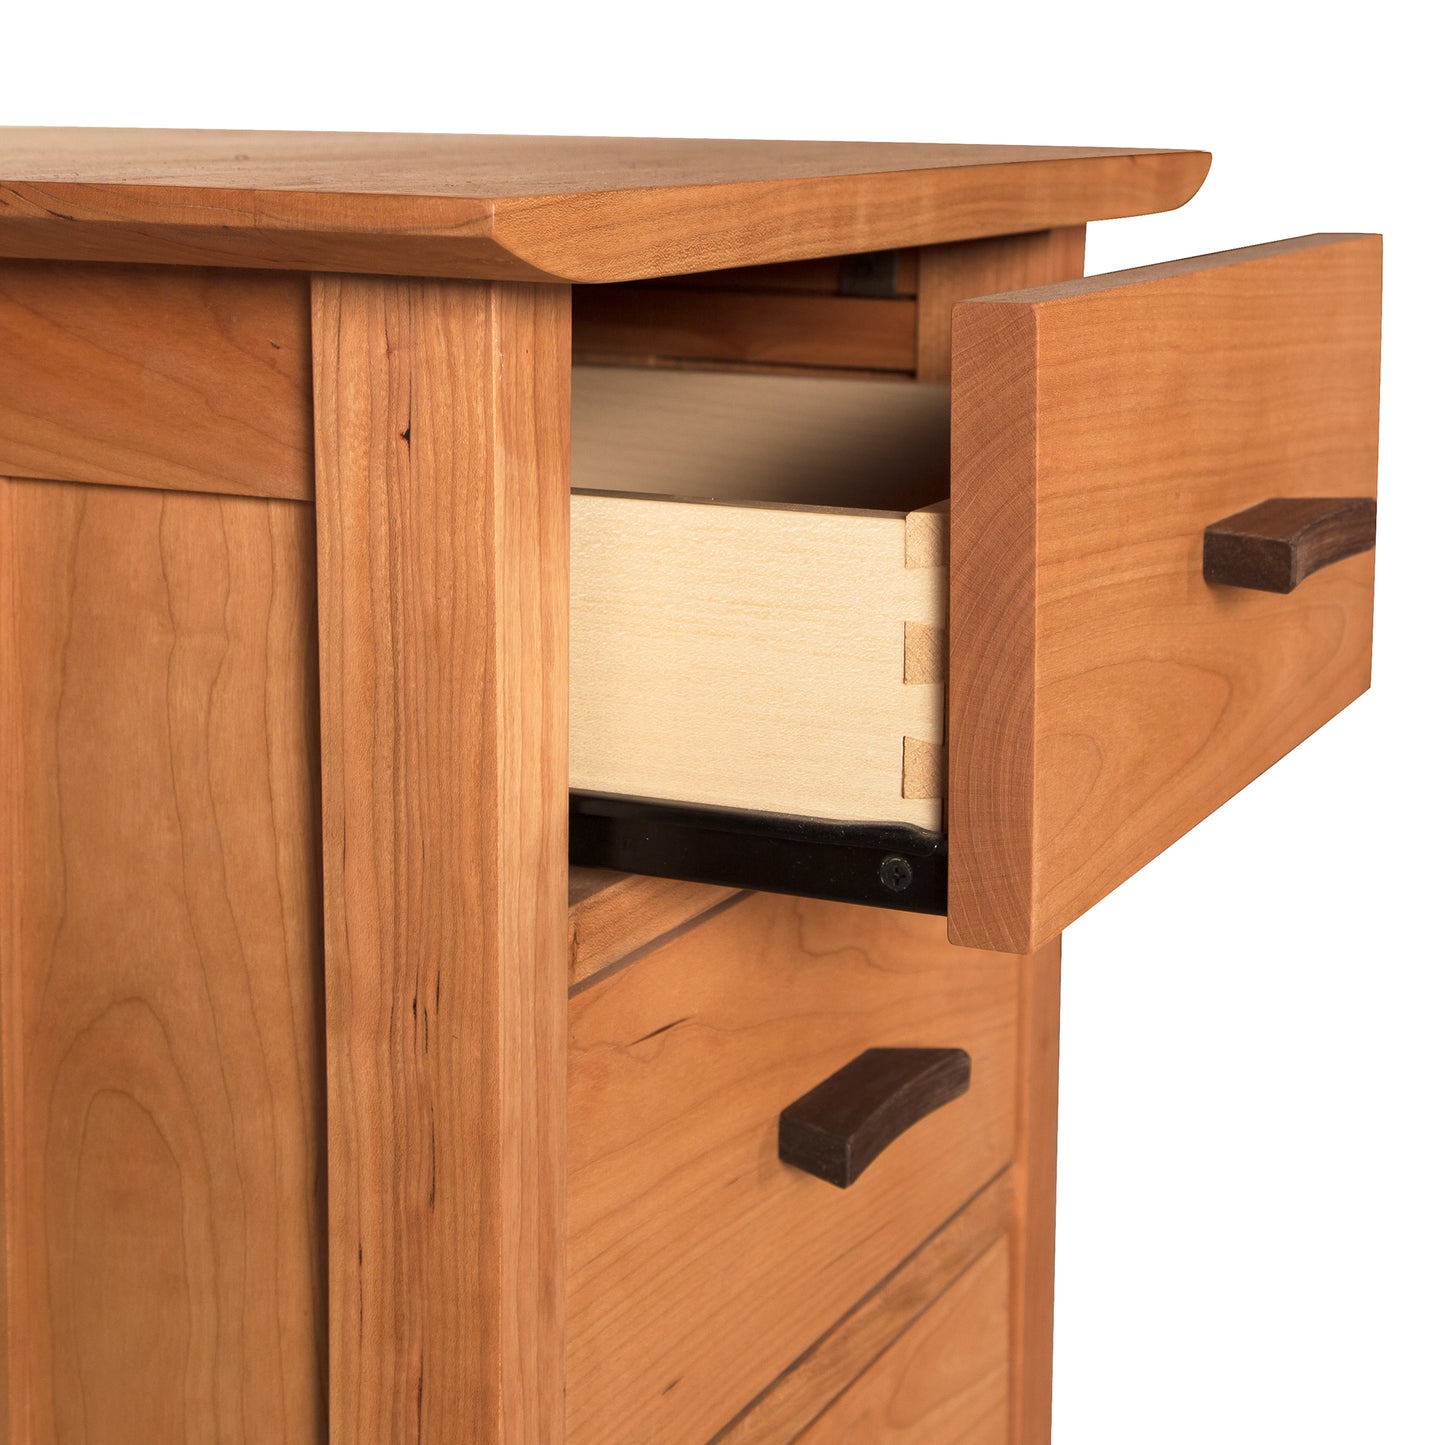 A Vermont Furniture Designs Contemporary Craftsman 3-Drawer Nightstand with storage drawers.